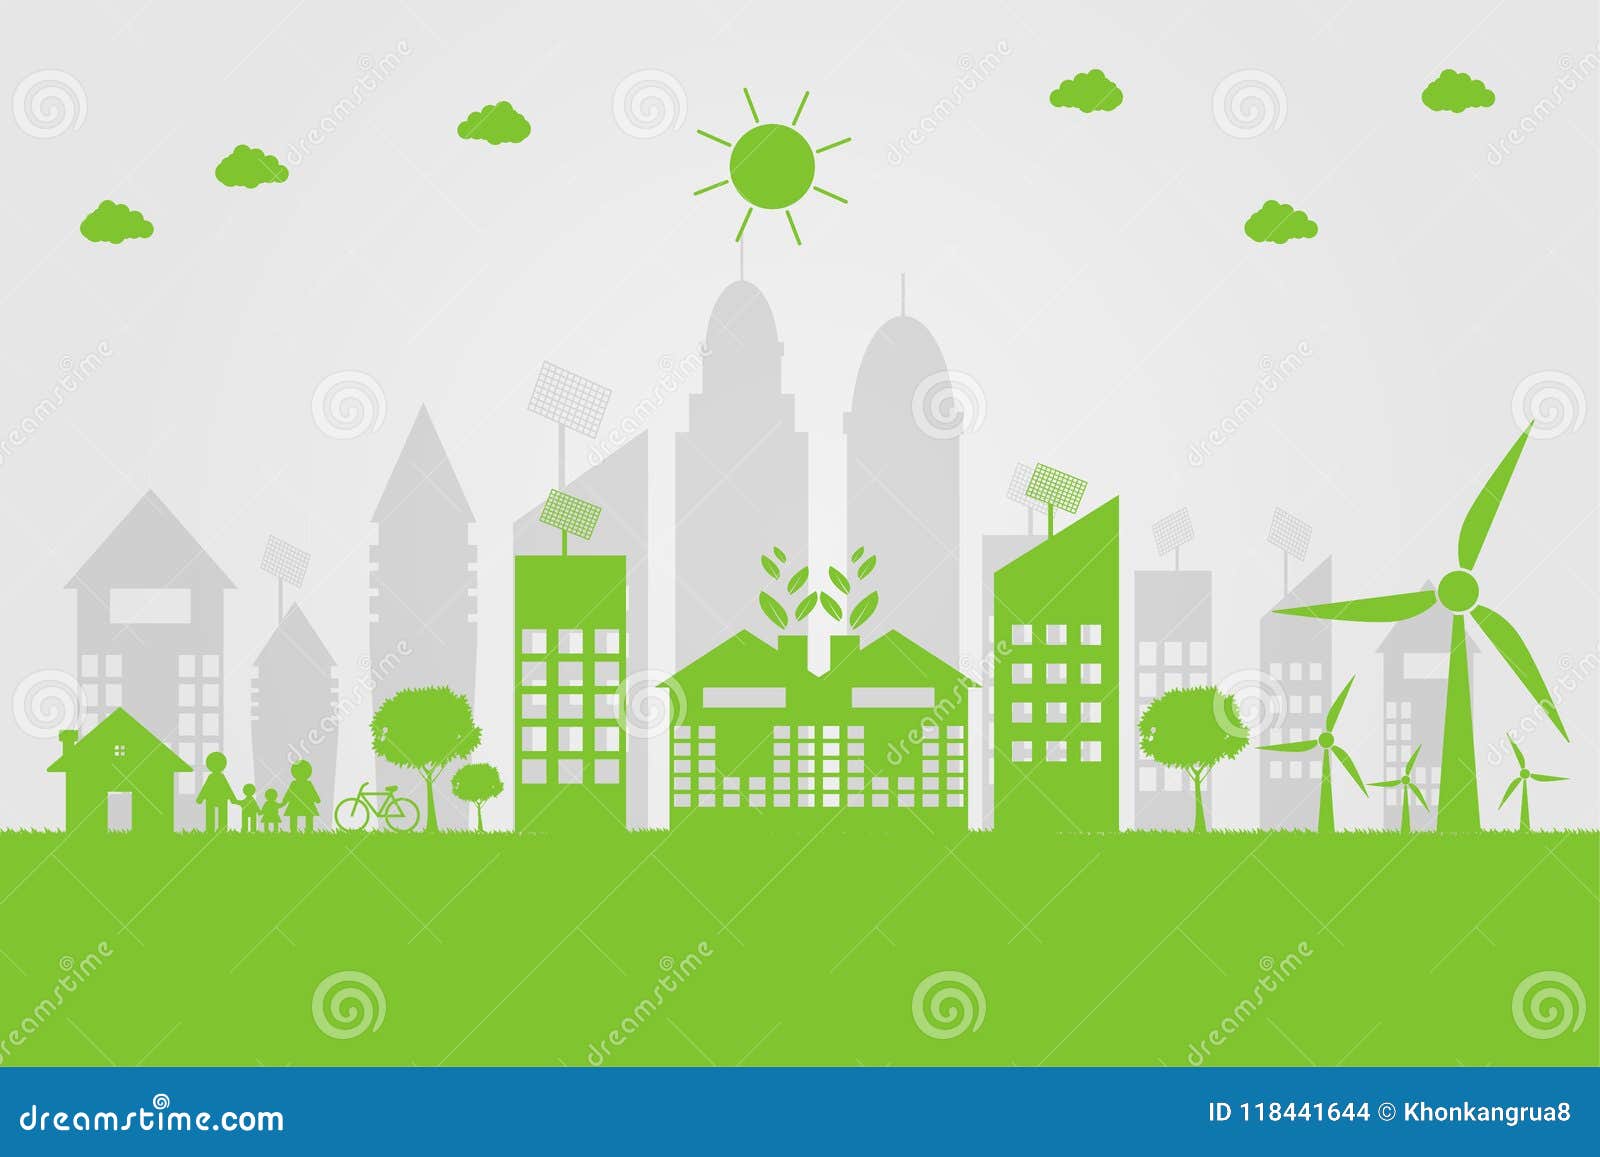 green cities help the world with eco-friendly concept ideas. 